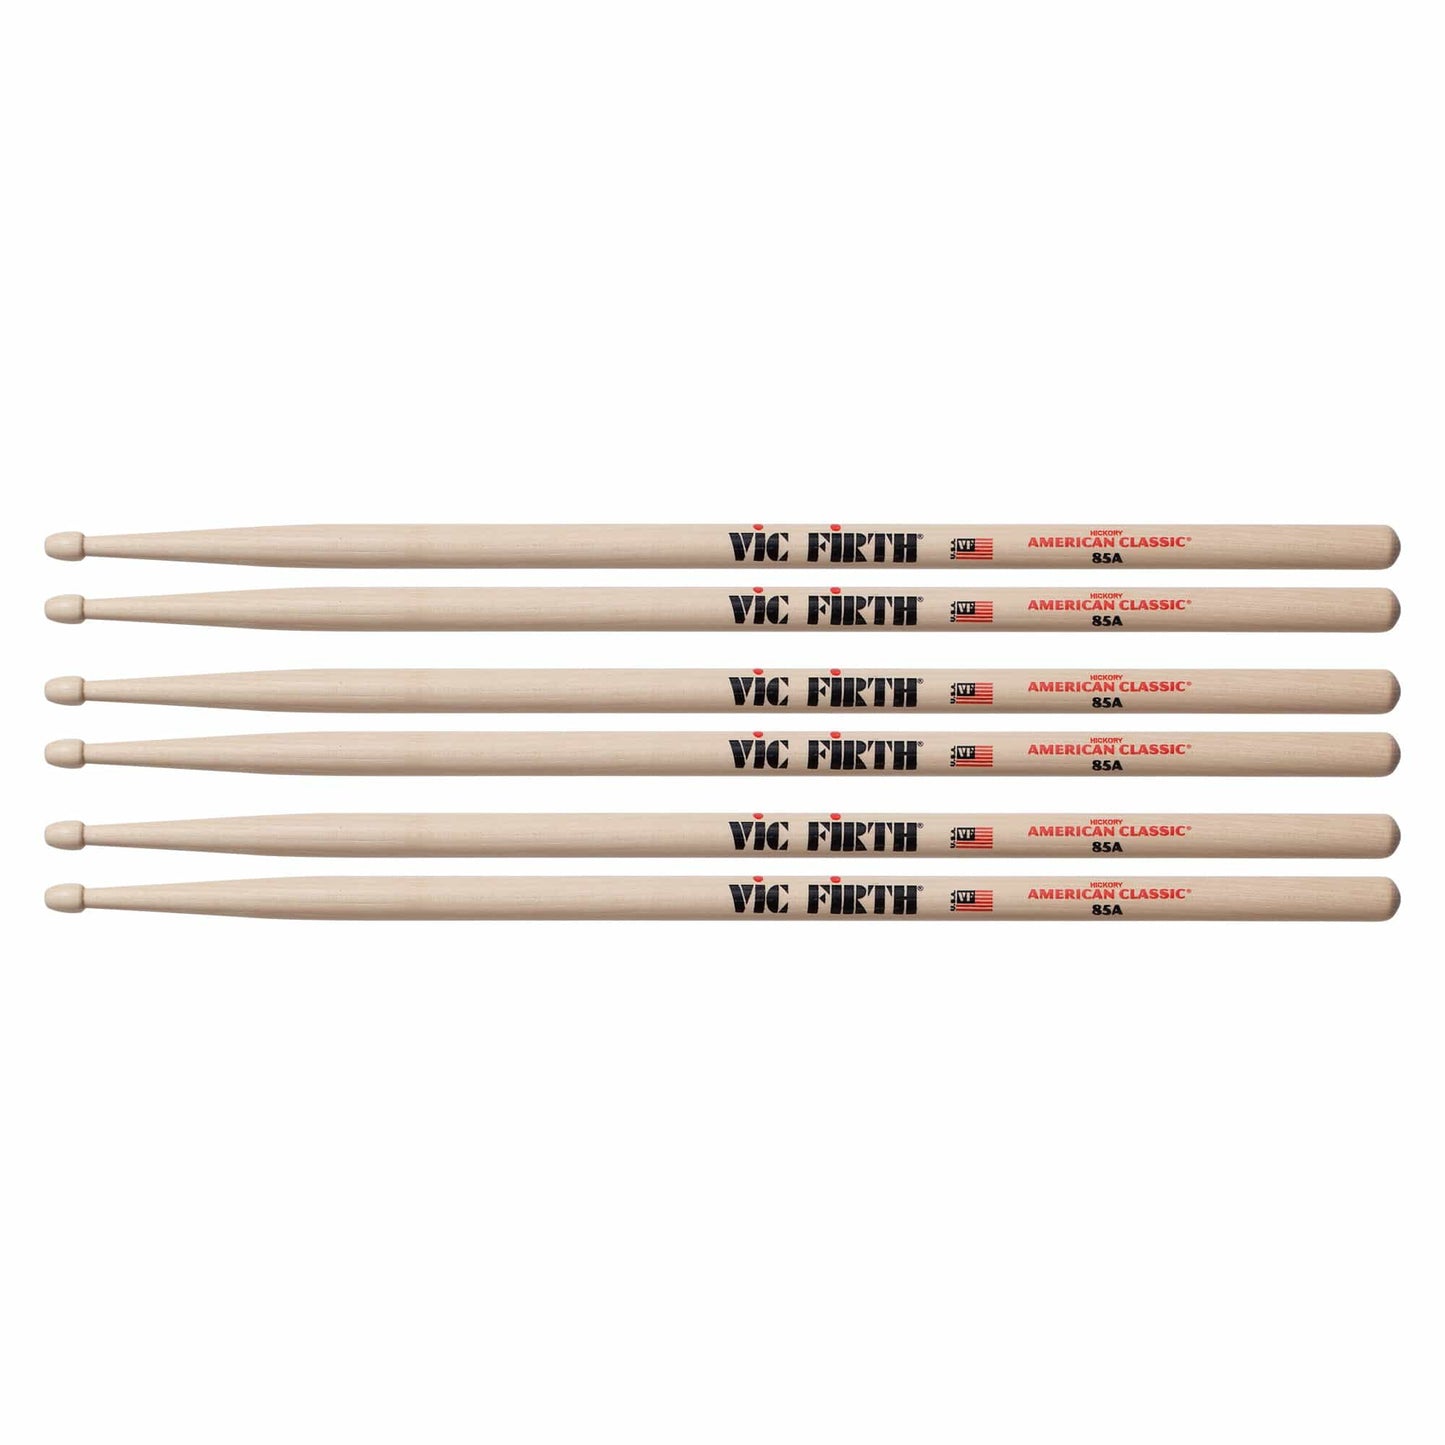 Vic Firth American Classic 85A Wood Tip Drum Sticks (3 Pair Bundle) Drums and Percussion / Parts and Accessories / Drum Sticks and Mallets